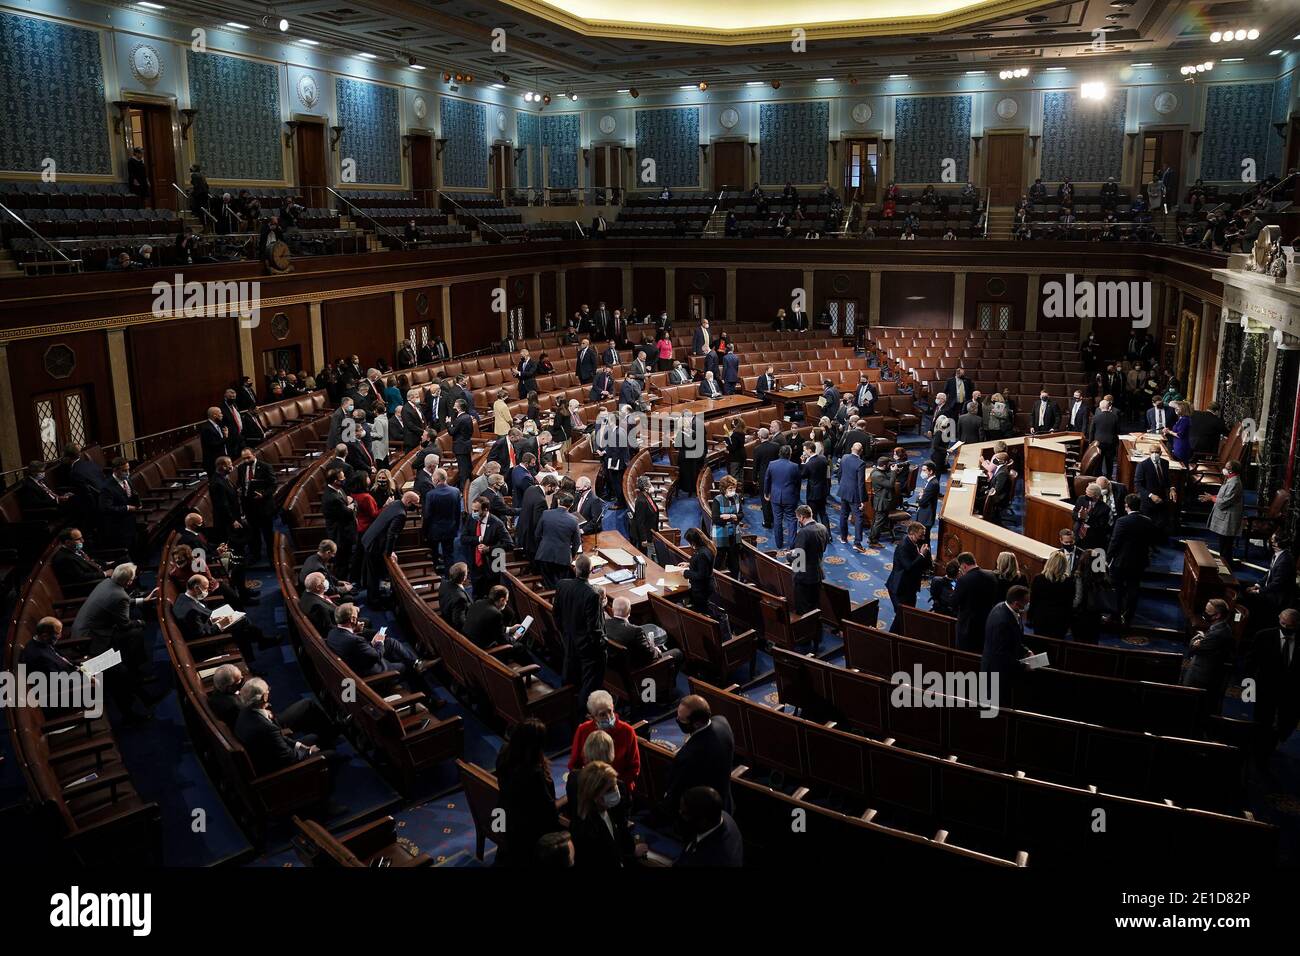 Senators and Senate clerks leave to debate the certification of Arizona's Electoral College votes from the 2020 presidential election during a joint session of Congress on Wednesday, January 6, 2021.Credit: Greg Nash/Pool via CNP /MediaPunch Stock Photo